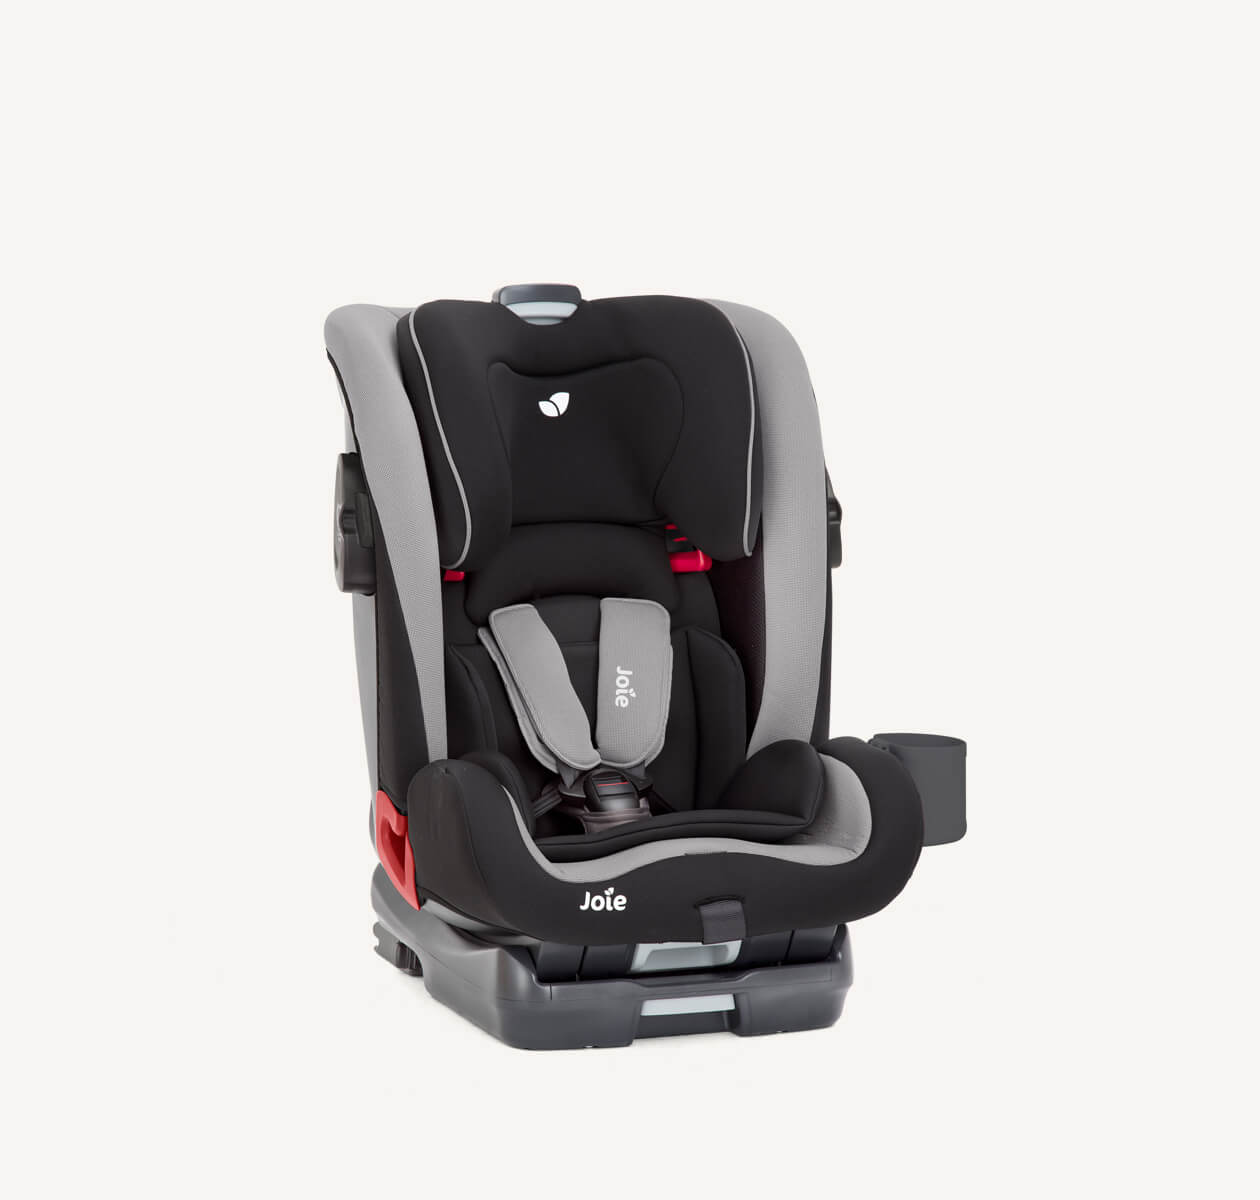 Joie bold R toddler car seat in  from a right angle.